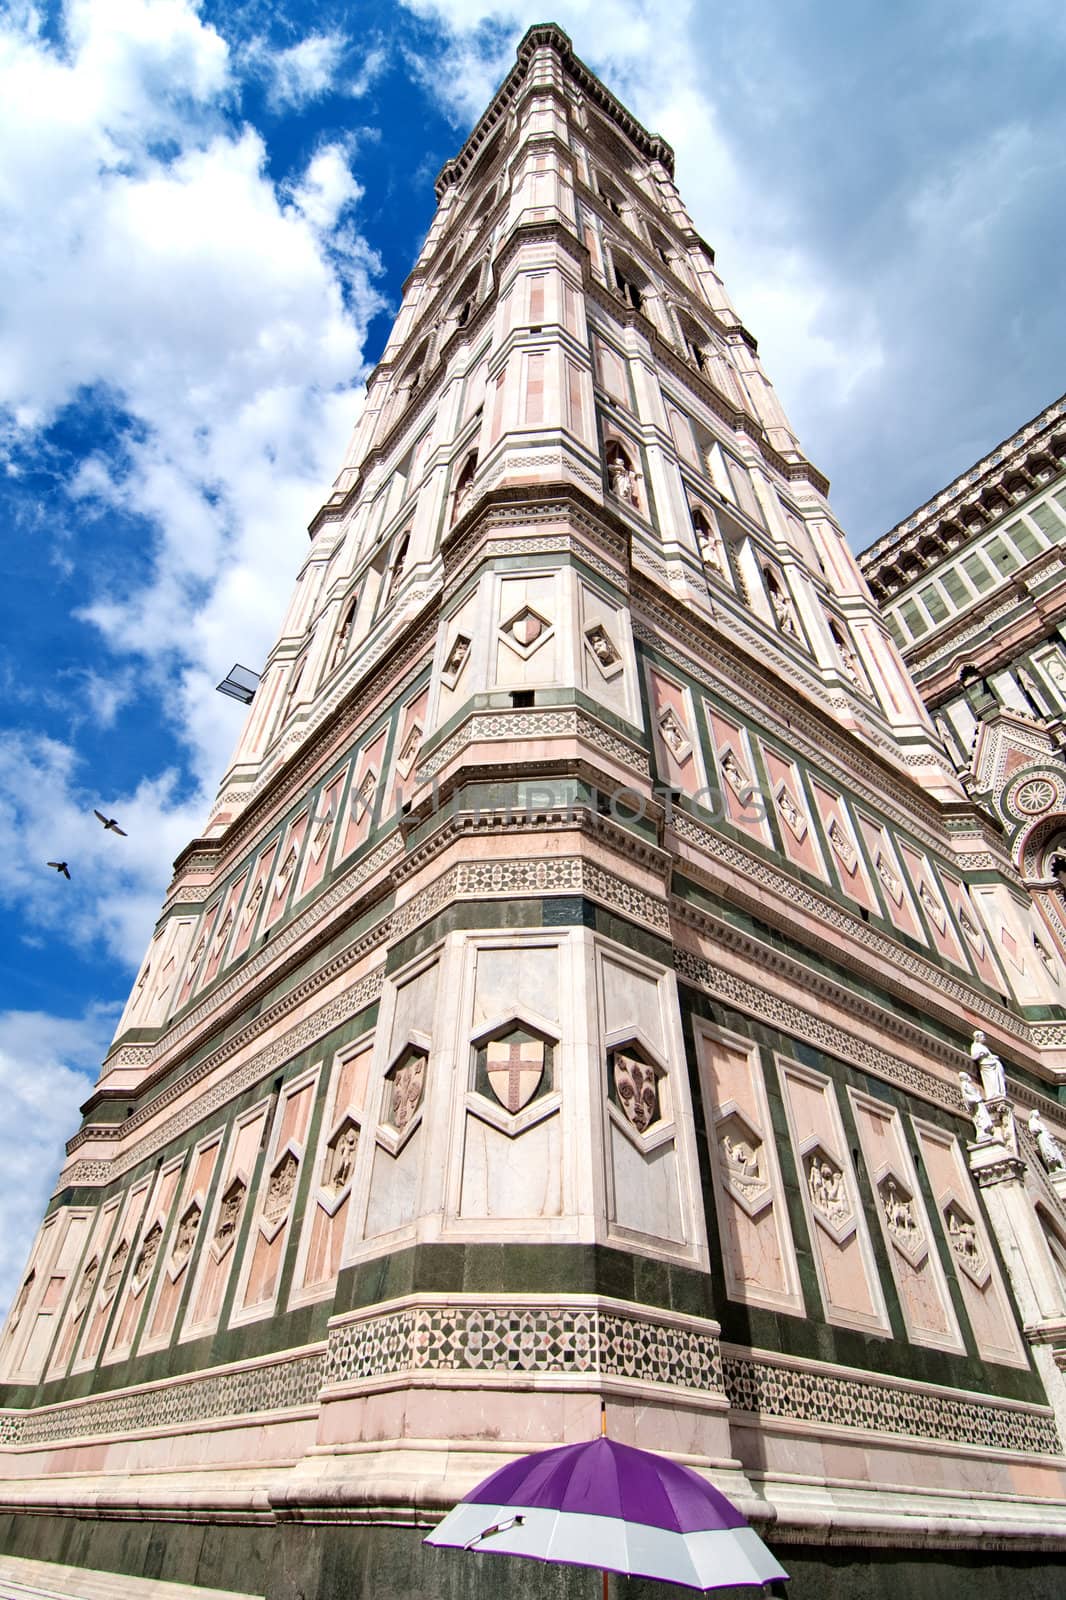 Architectural Detail of Piazza del Duomo in Florence, Italy